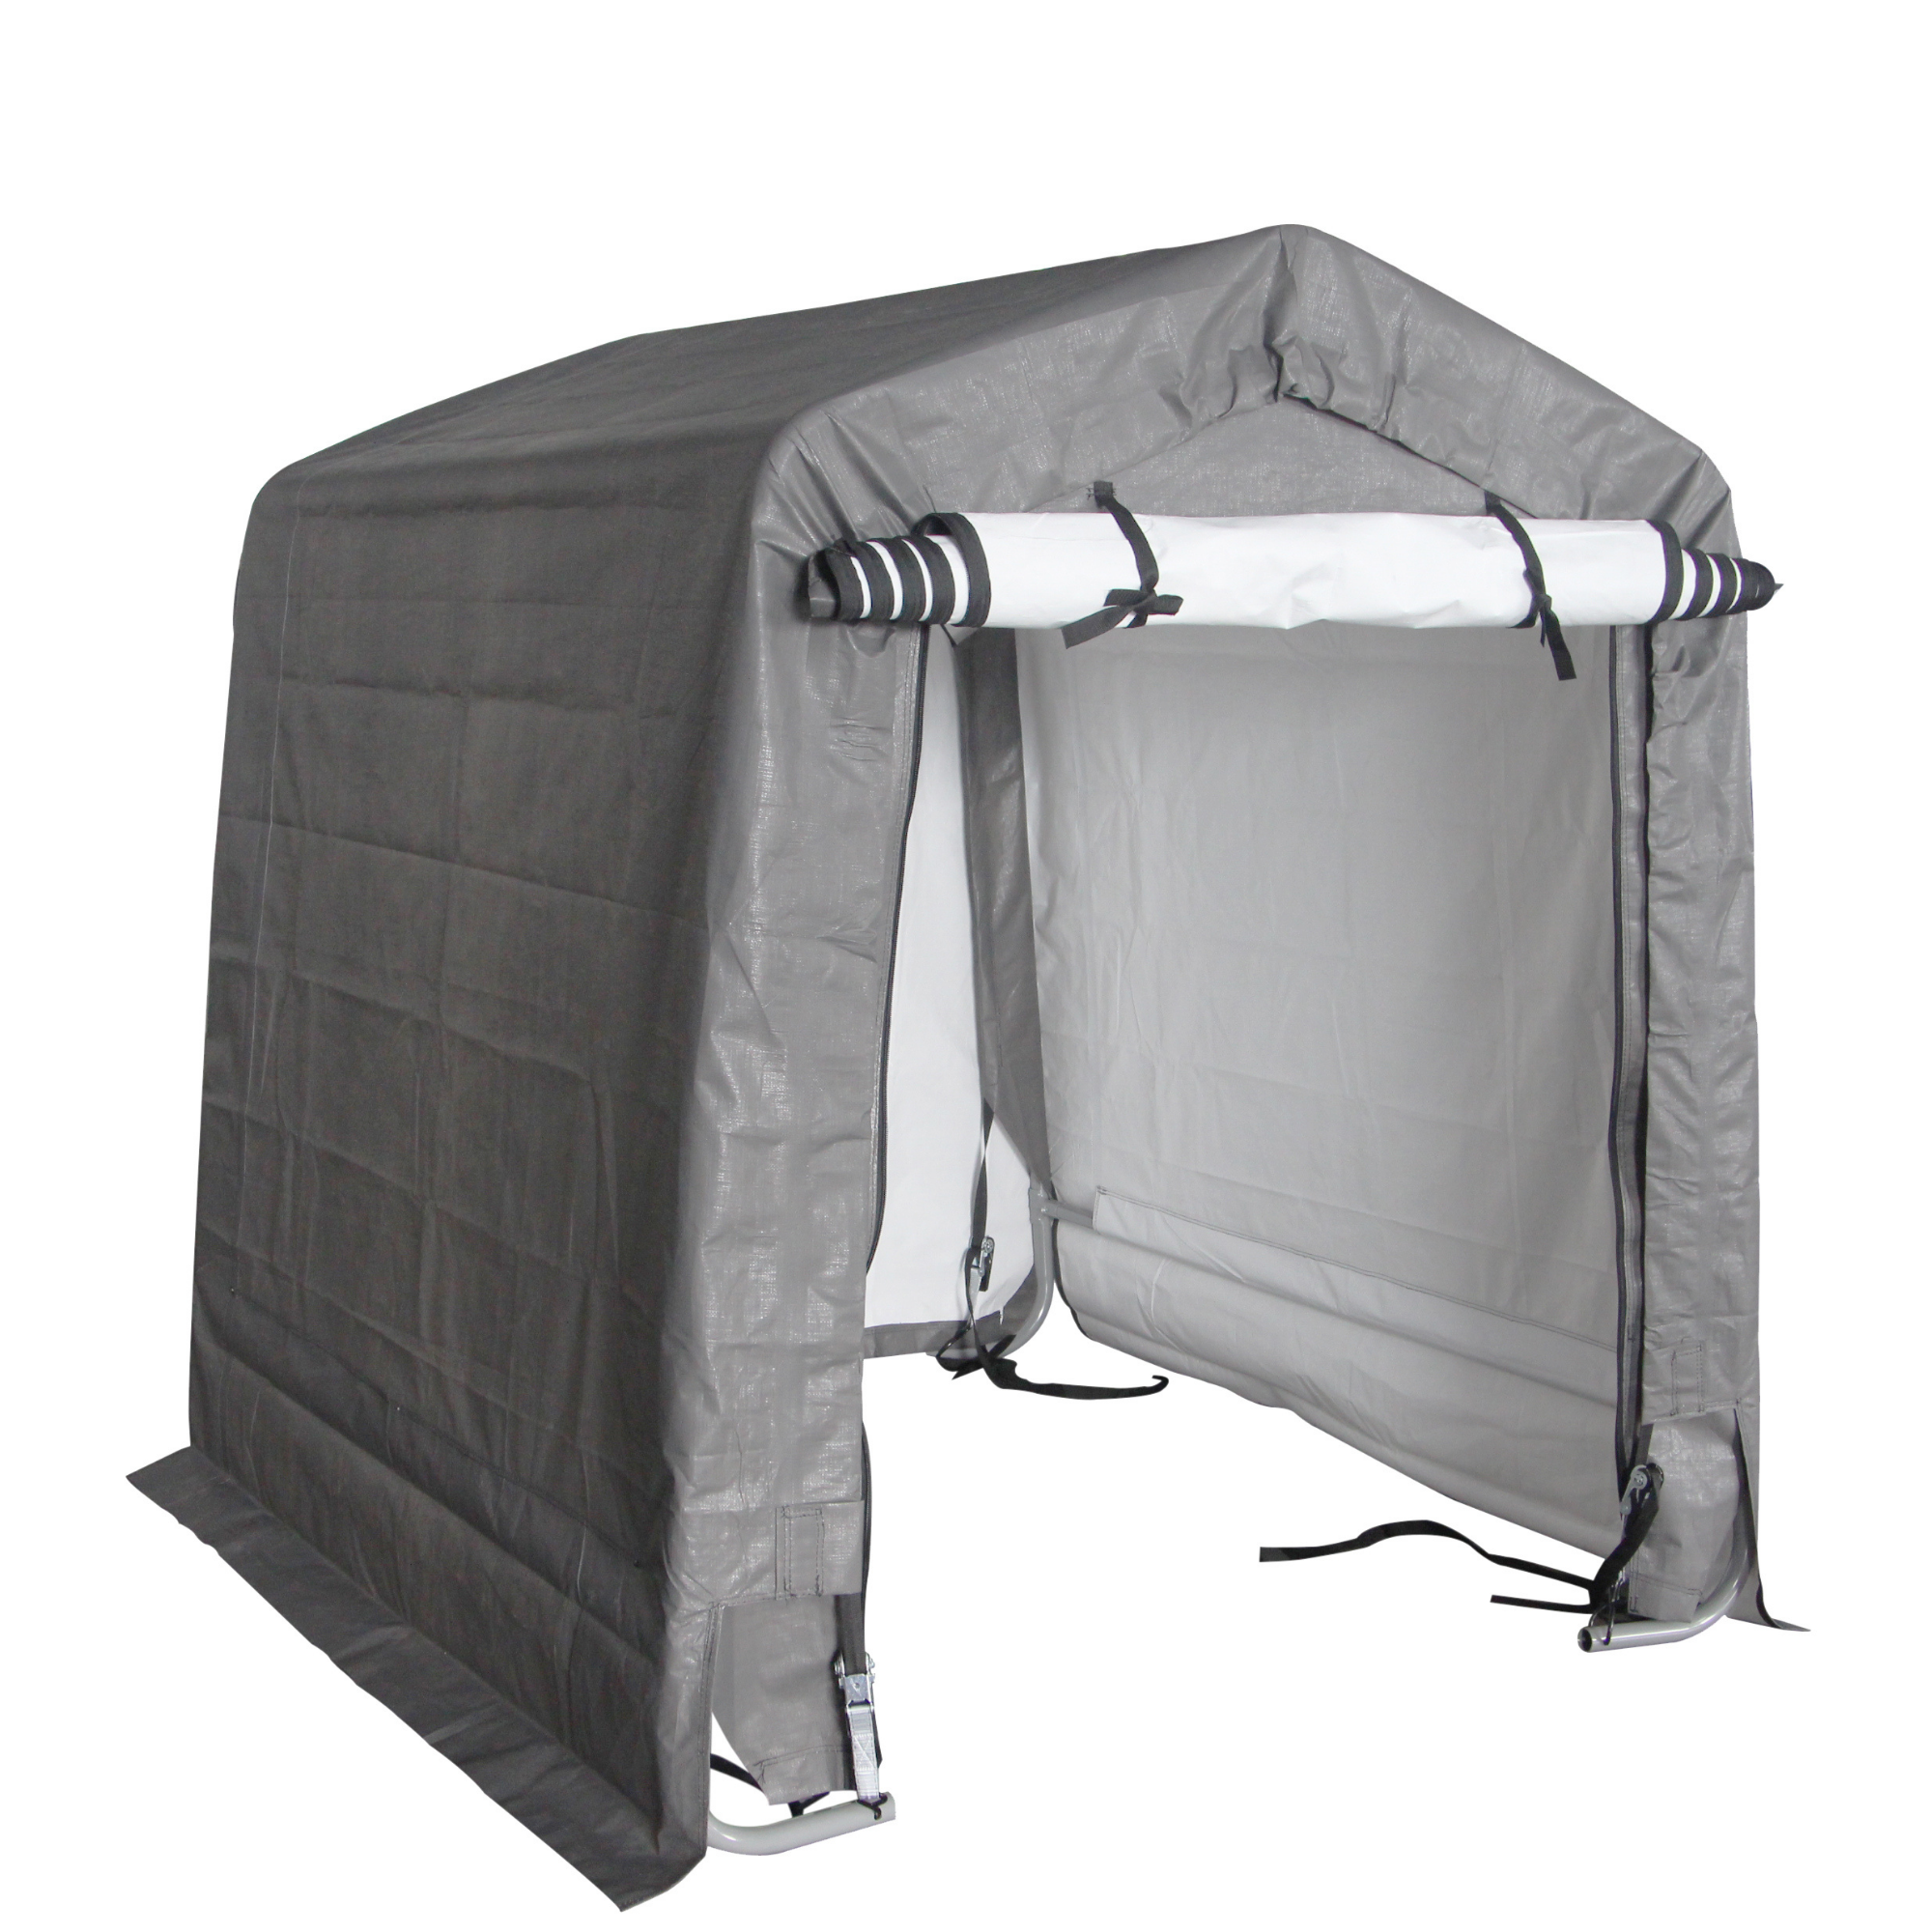 BillyOh Flexi Pop Up Portable Fabric Shed - 6x6